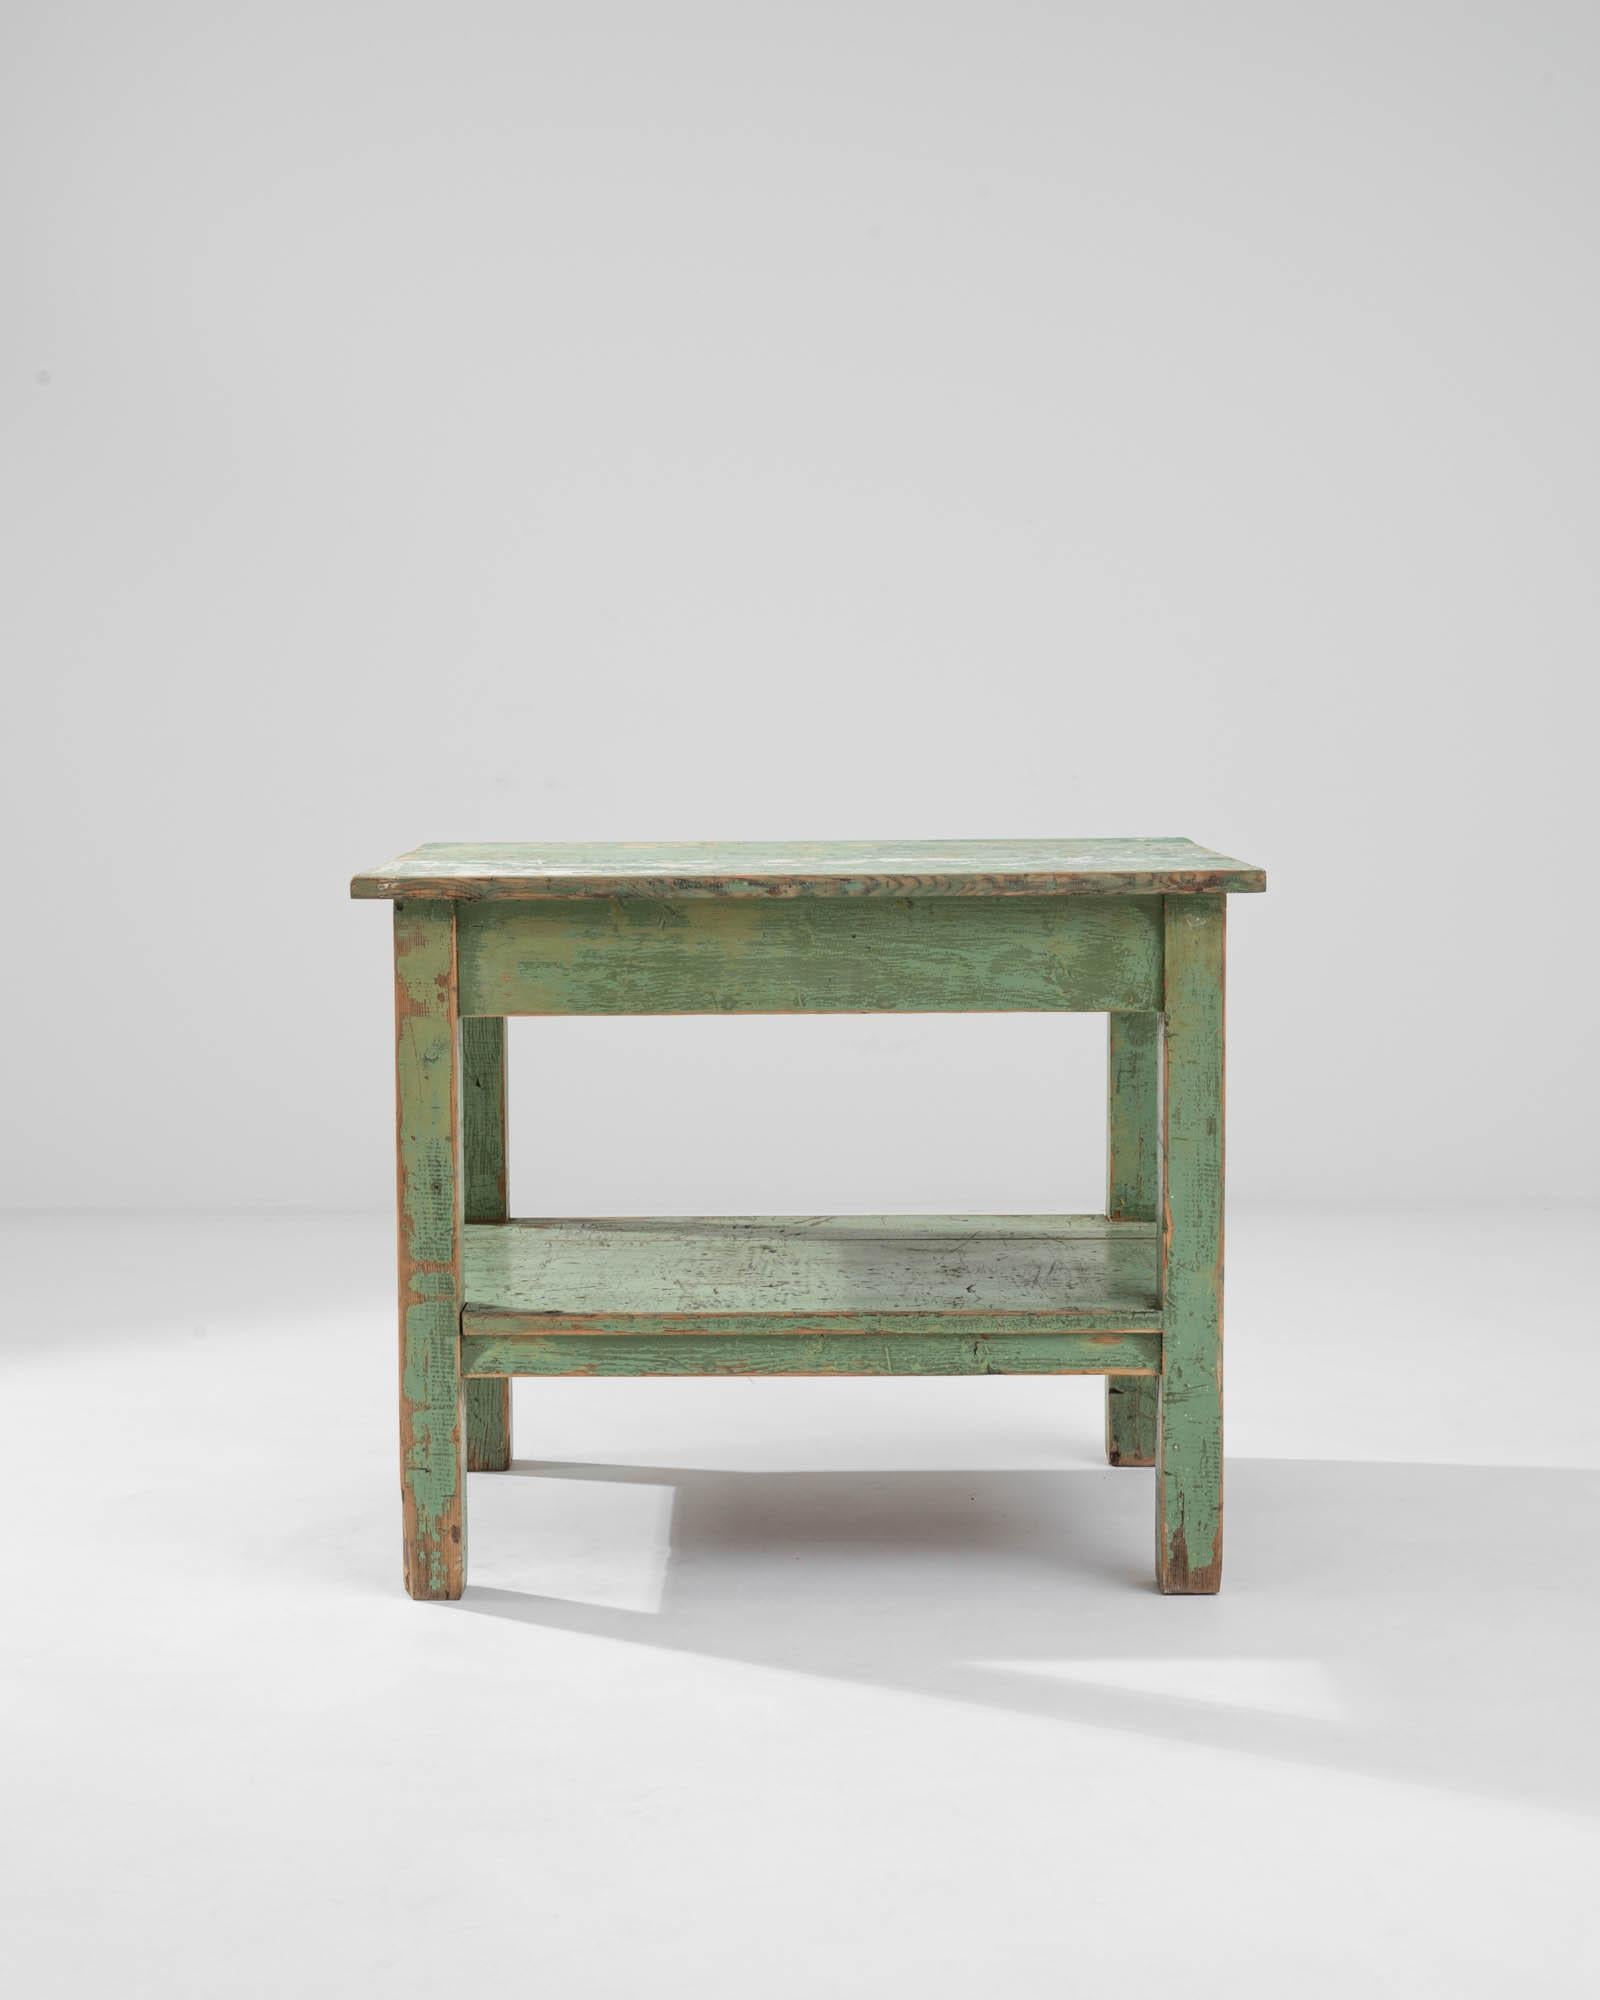 Crafted in France circa 1900, this charming antique table flaunts an original, slightly weathered patina in a muted light green hue, adding to the textural richness of its appearance and revealing intriguing patterns on the tabletop surface. The